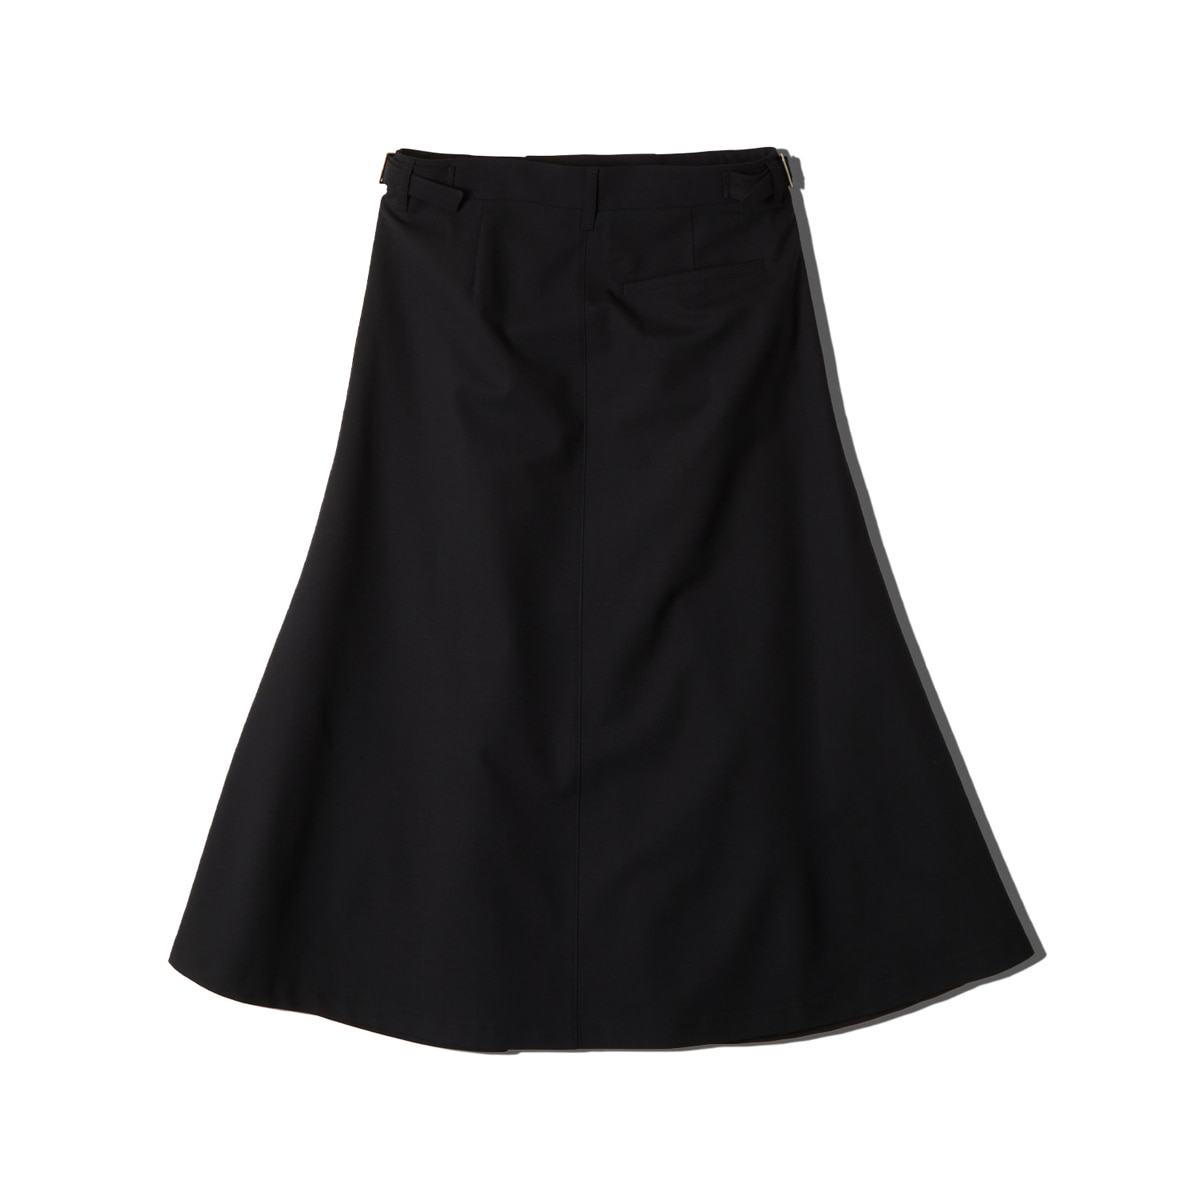 [NEITHERS] WOOL 4 WRINKLED WIDE SKIRT &#039;NAVY&#039;